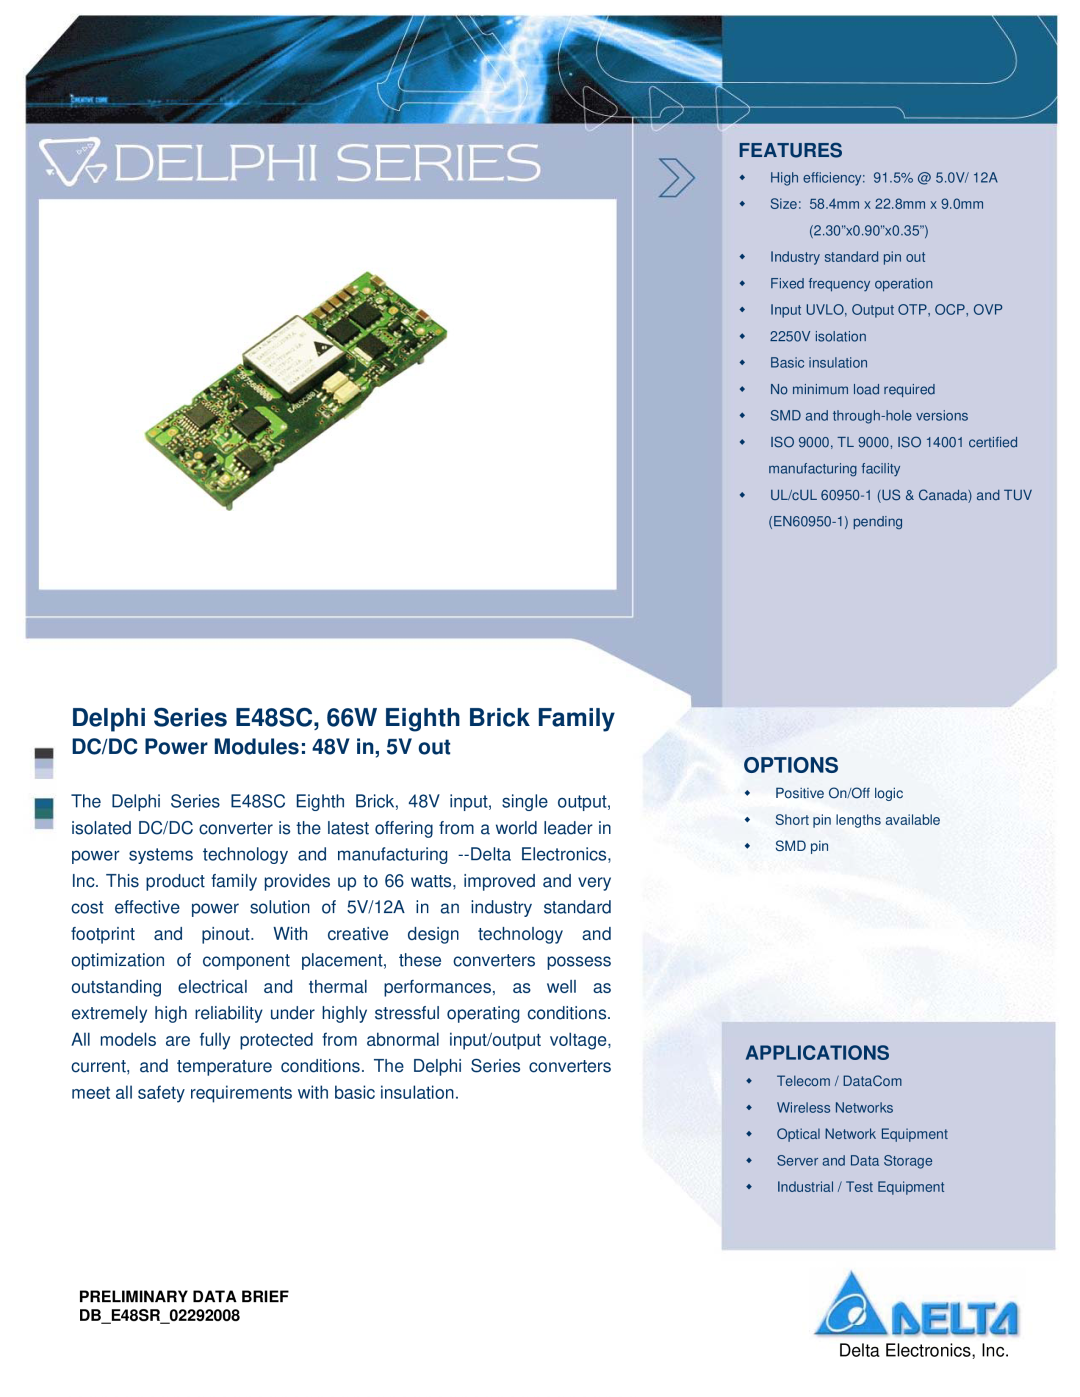 Delta Electronics manual Delphi Series E48SC, 66W Eighth Brick Family, DC/DC Power Modules 48V in, 5V out, Options 